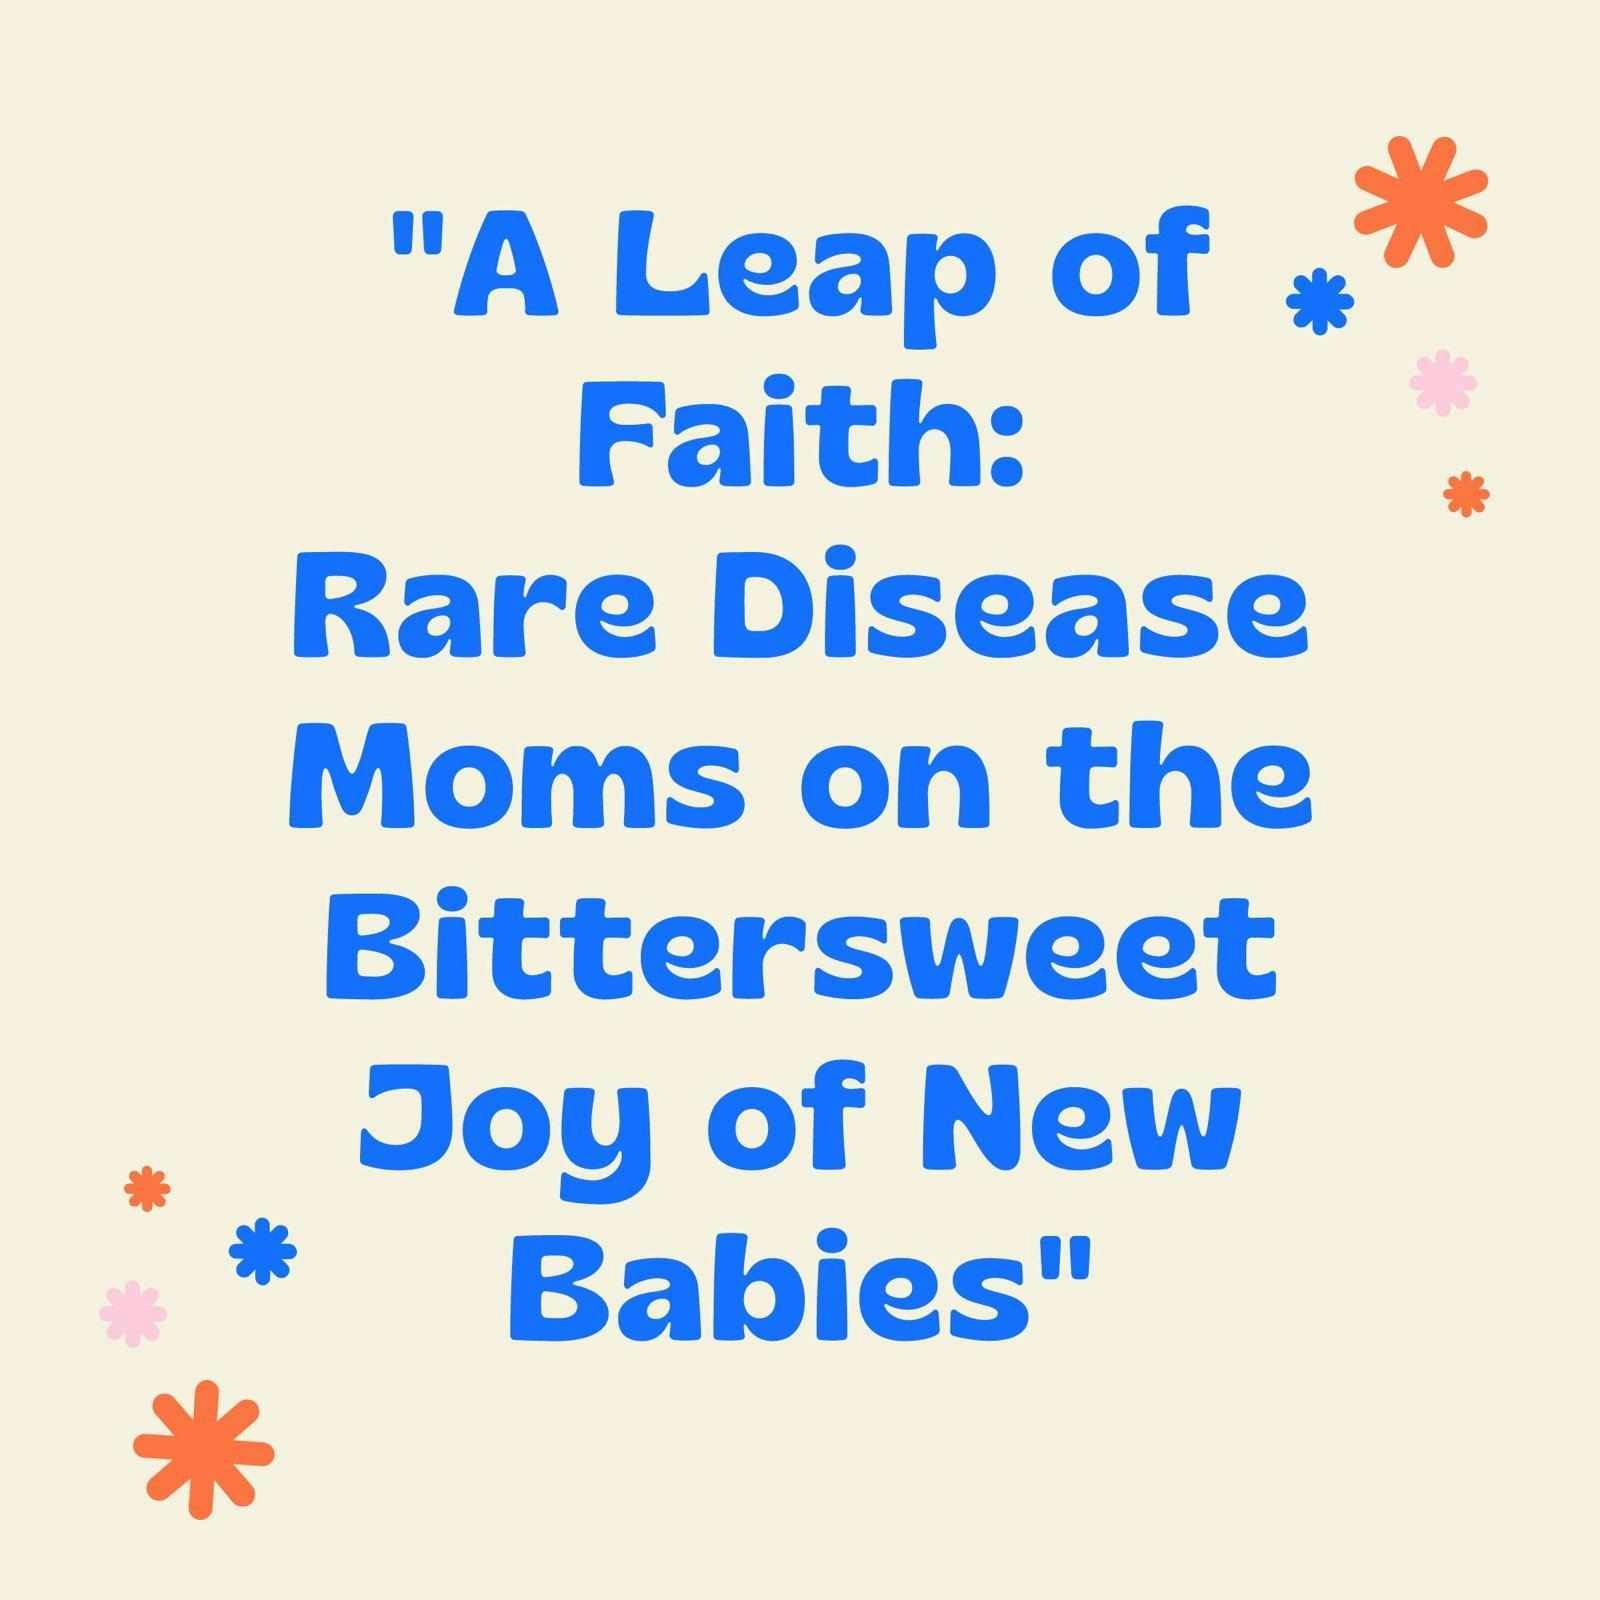 A Leap of Faith – Rare Disease Moms on the Bittersweet Joy of New Babies